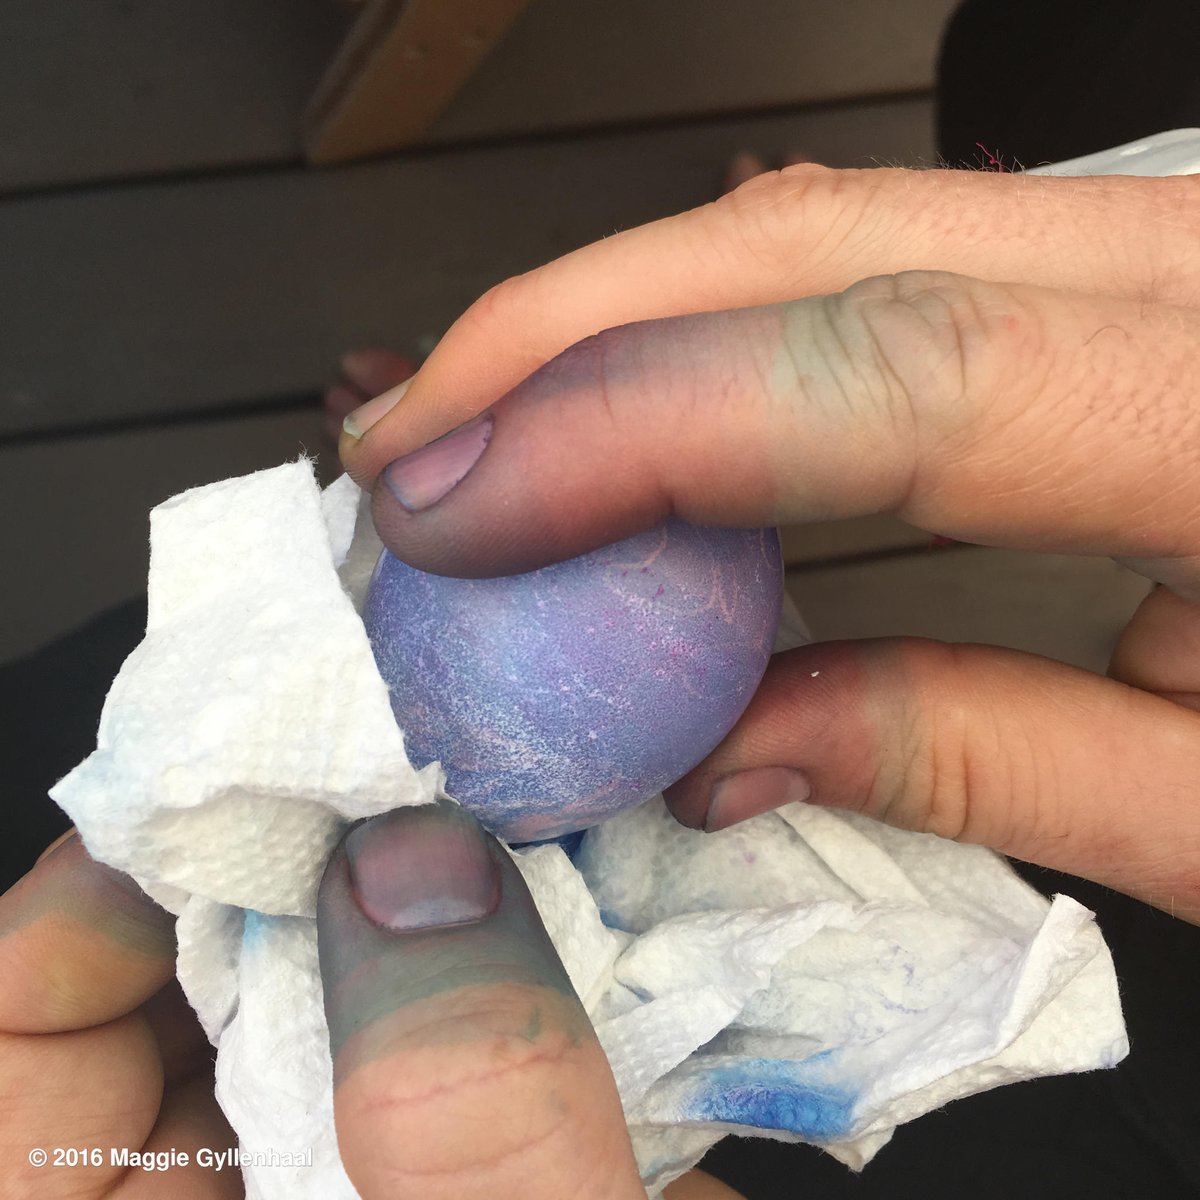 Dying Easter eggs with @petersarsgaard #BlackAndBlue https://t.co/2nMZVS8Ofs